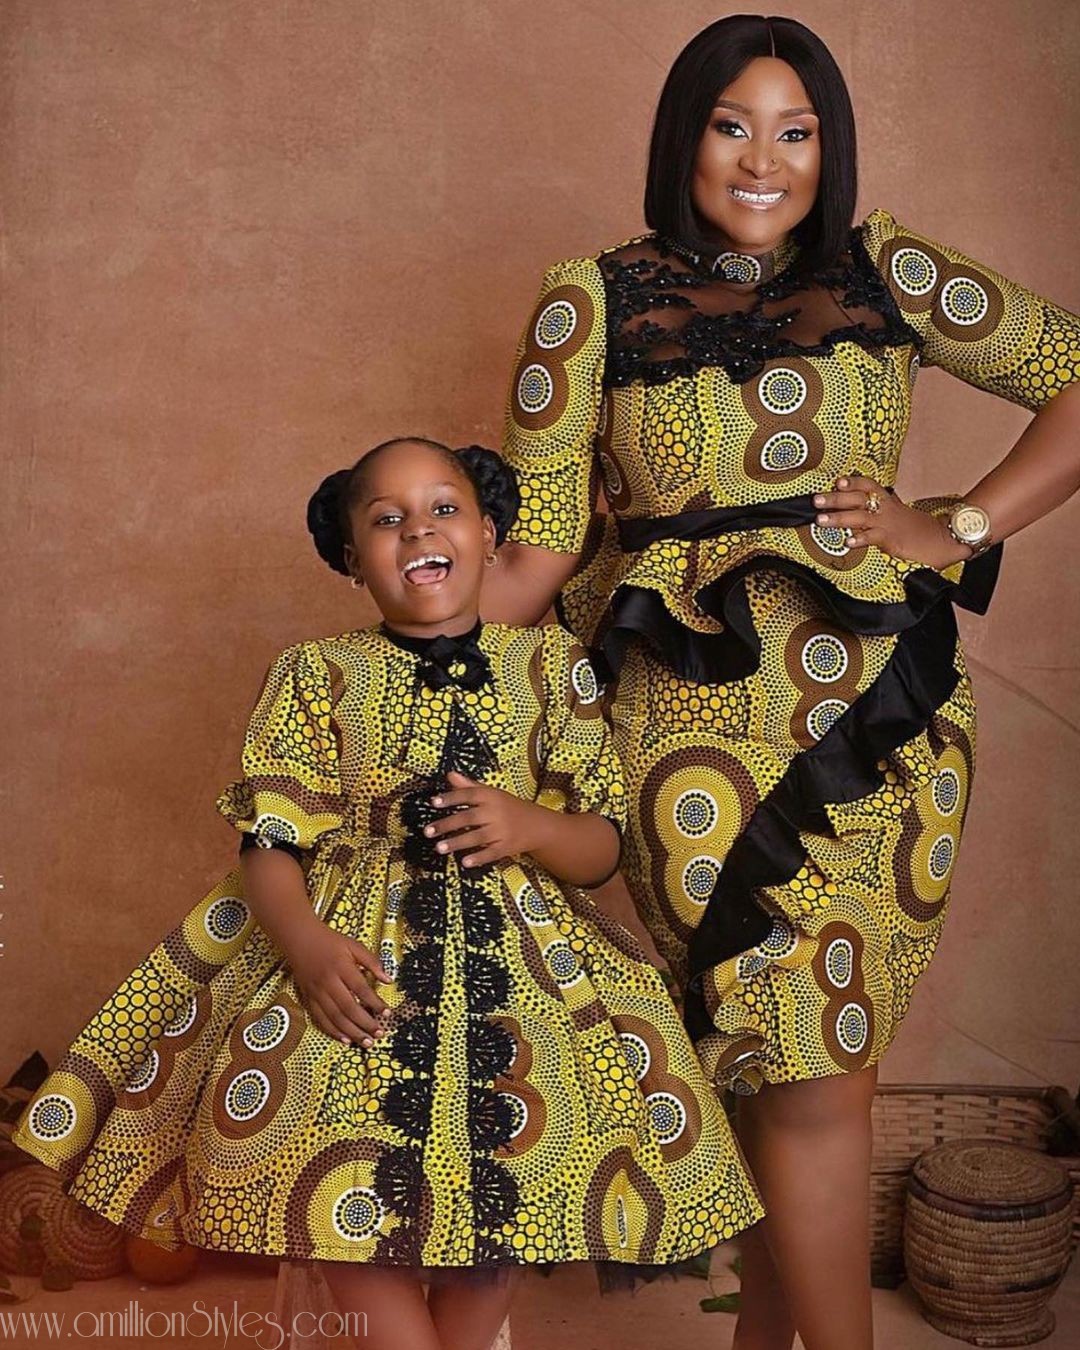 9 Stunning Mother-Child Styles Inspiration For Photo Shoots